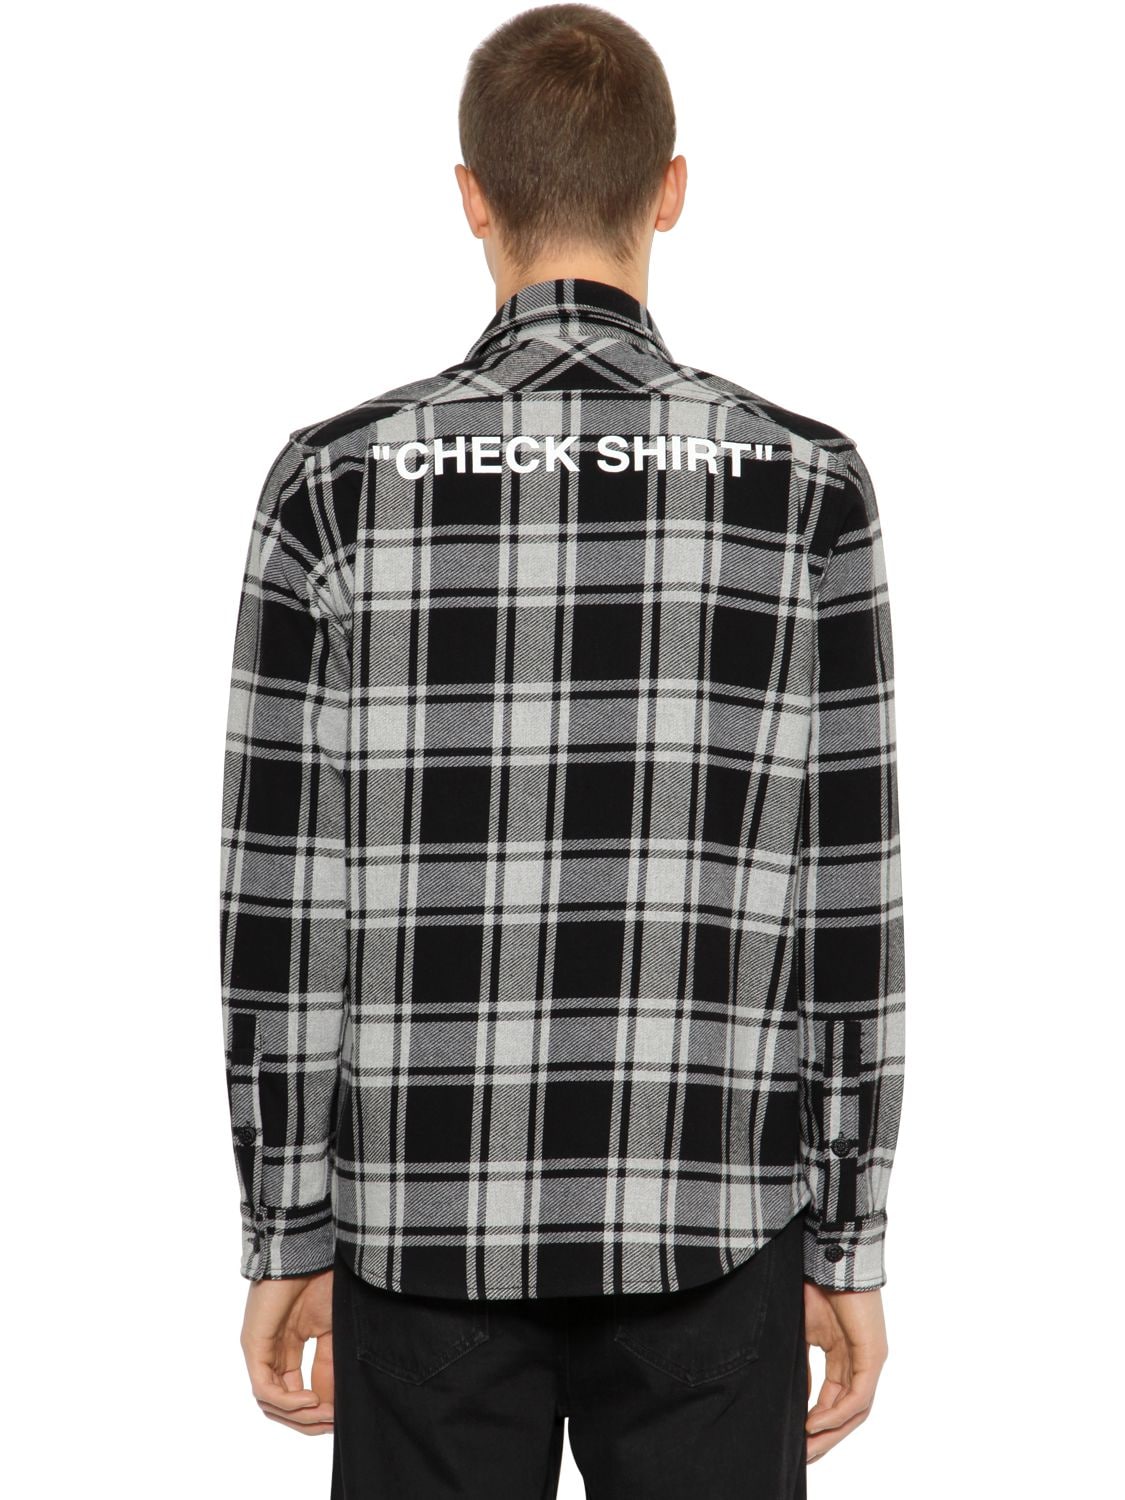 Off-white "check Shirt" Cotton Flannel Shirt In Grey